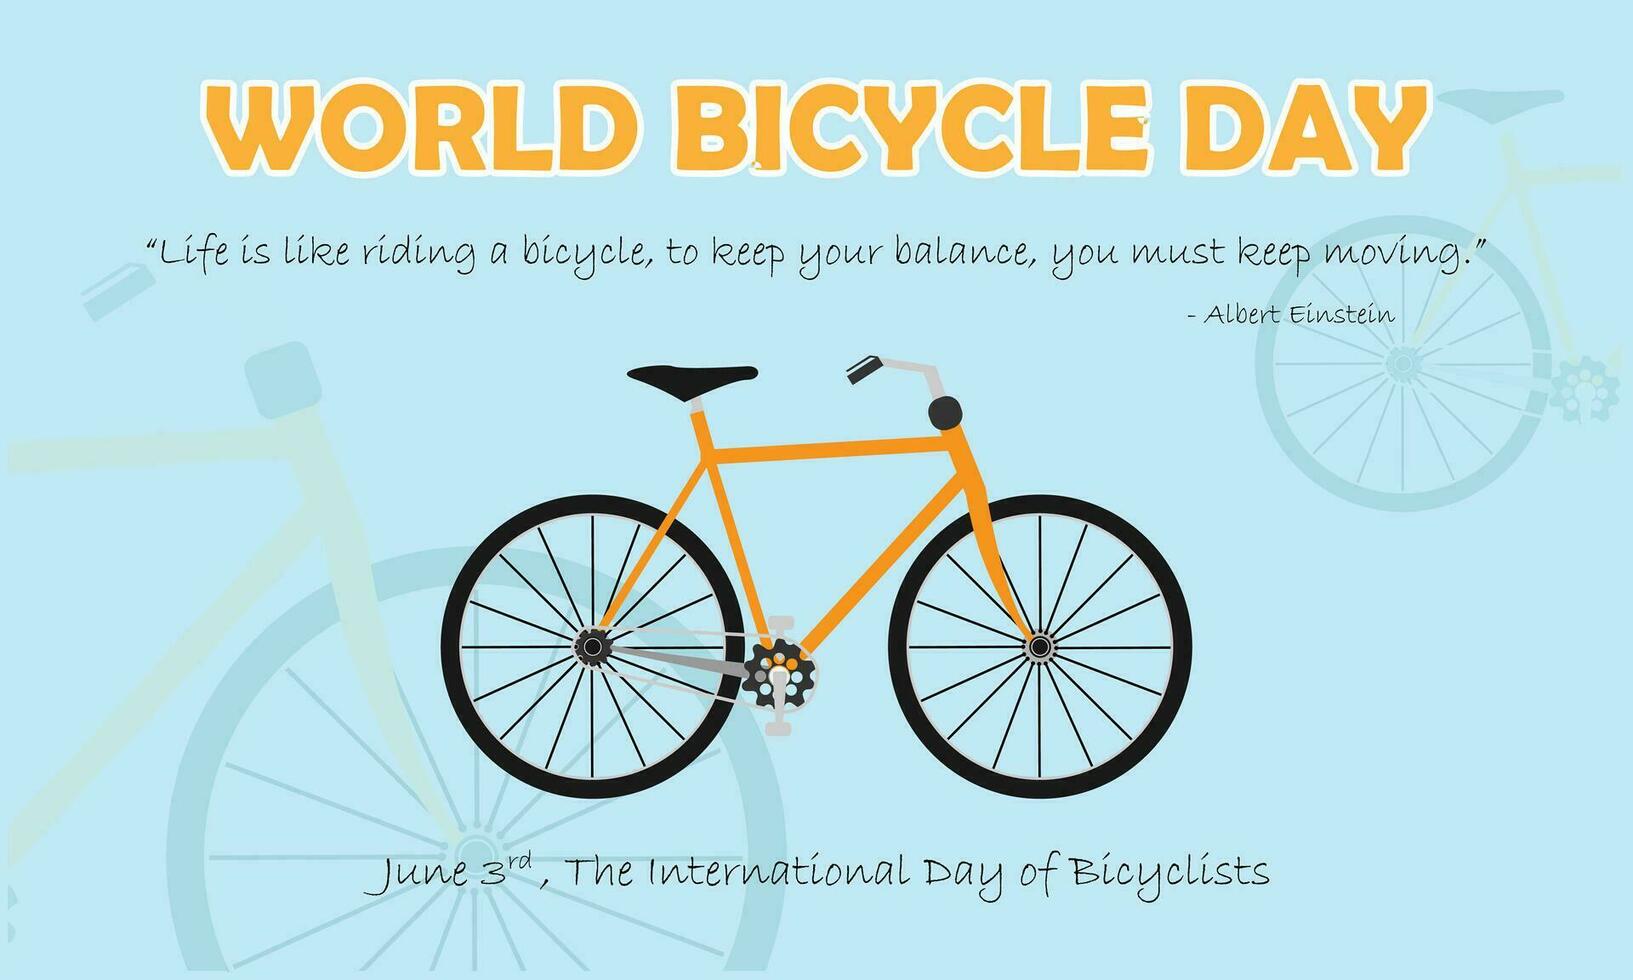 World Bicycle Day Poster Illustration vector